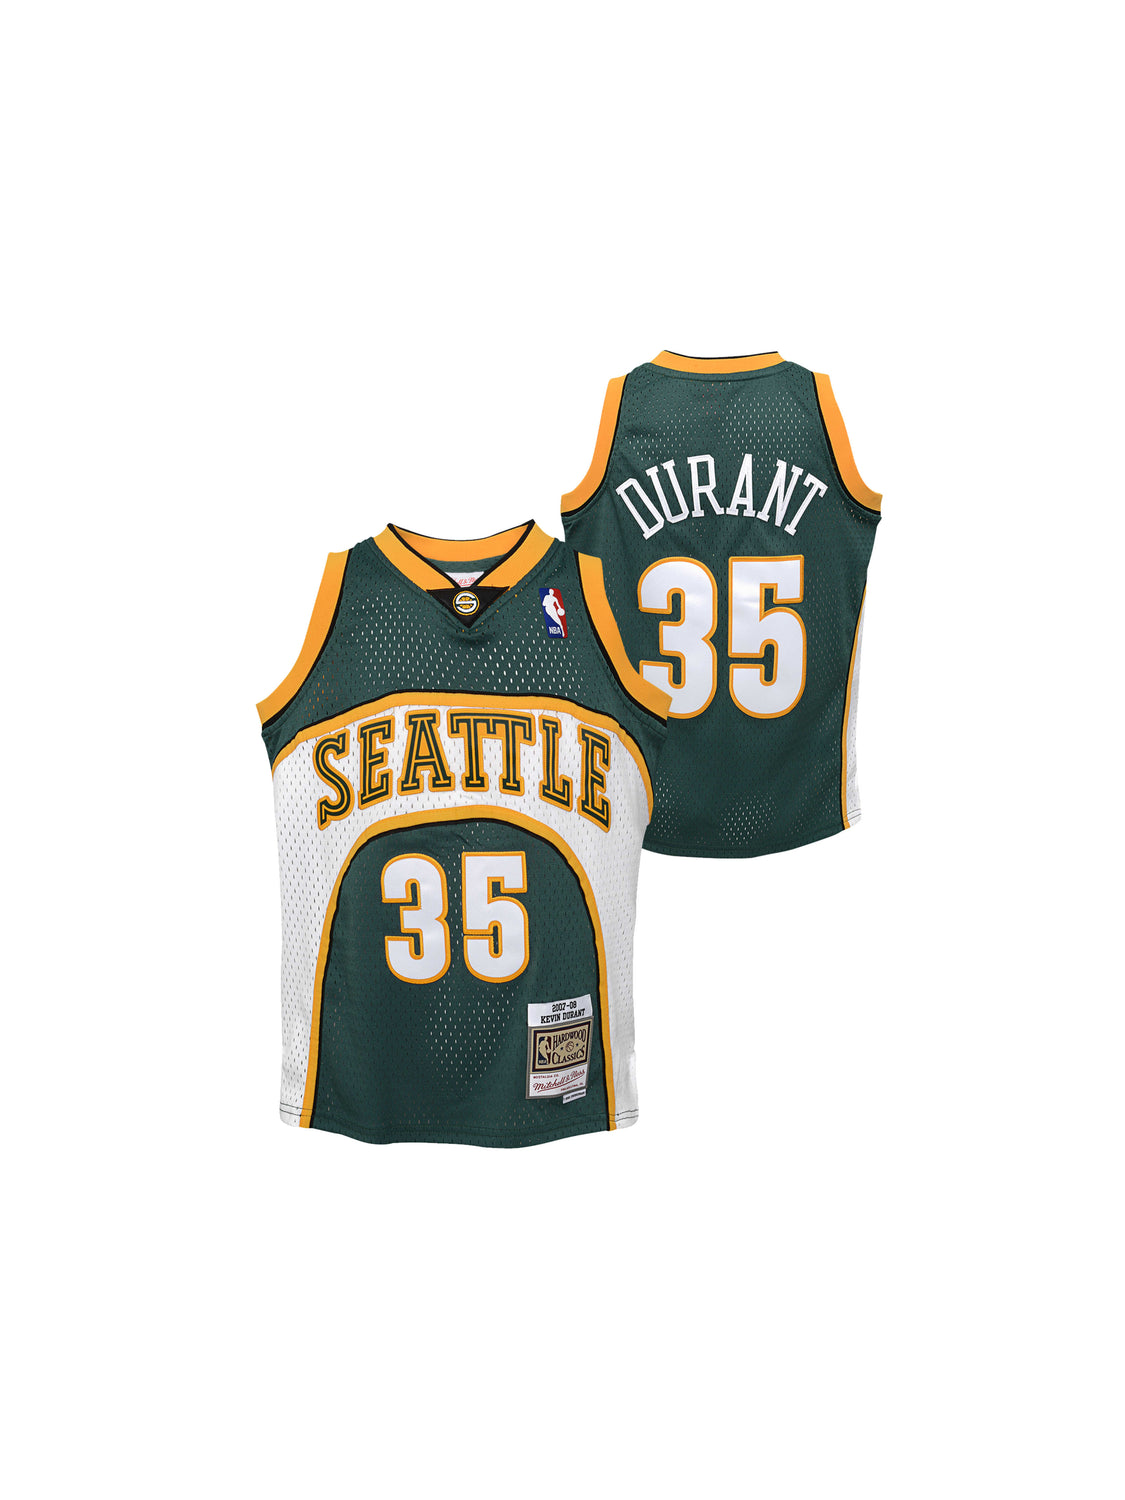 Authentic Kevin Durant Seattle Supersonics 2007-08 Jersey - Shop Mitchell &  Ness Authentic Jerseys and Replicas Mitchell & Ness Nostalgia Co.